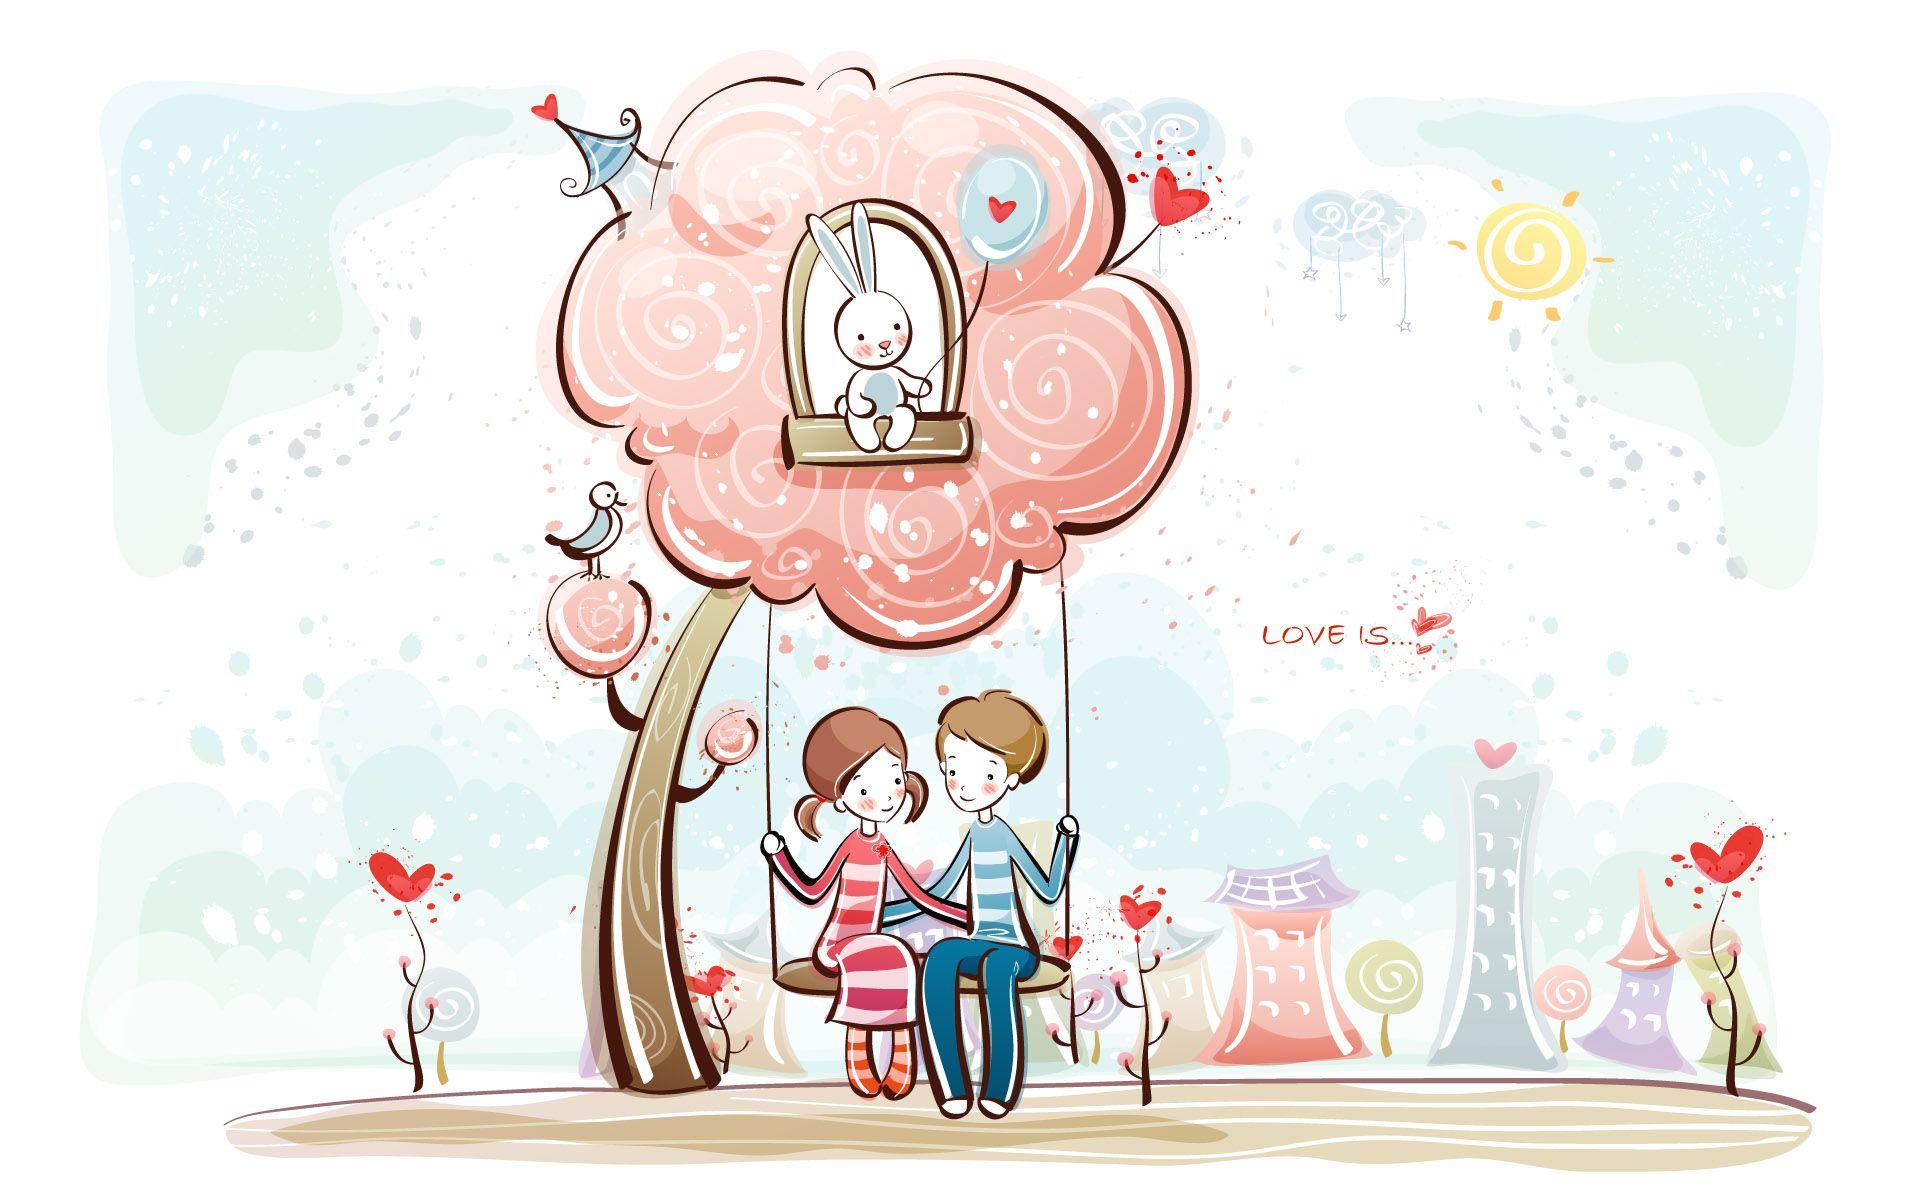 Lovers At Love Tree